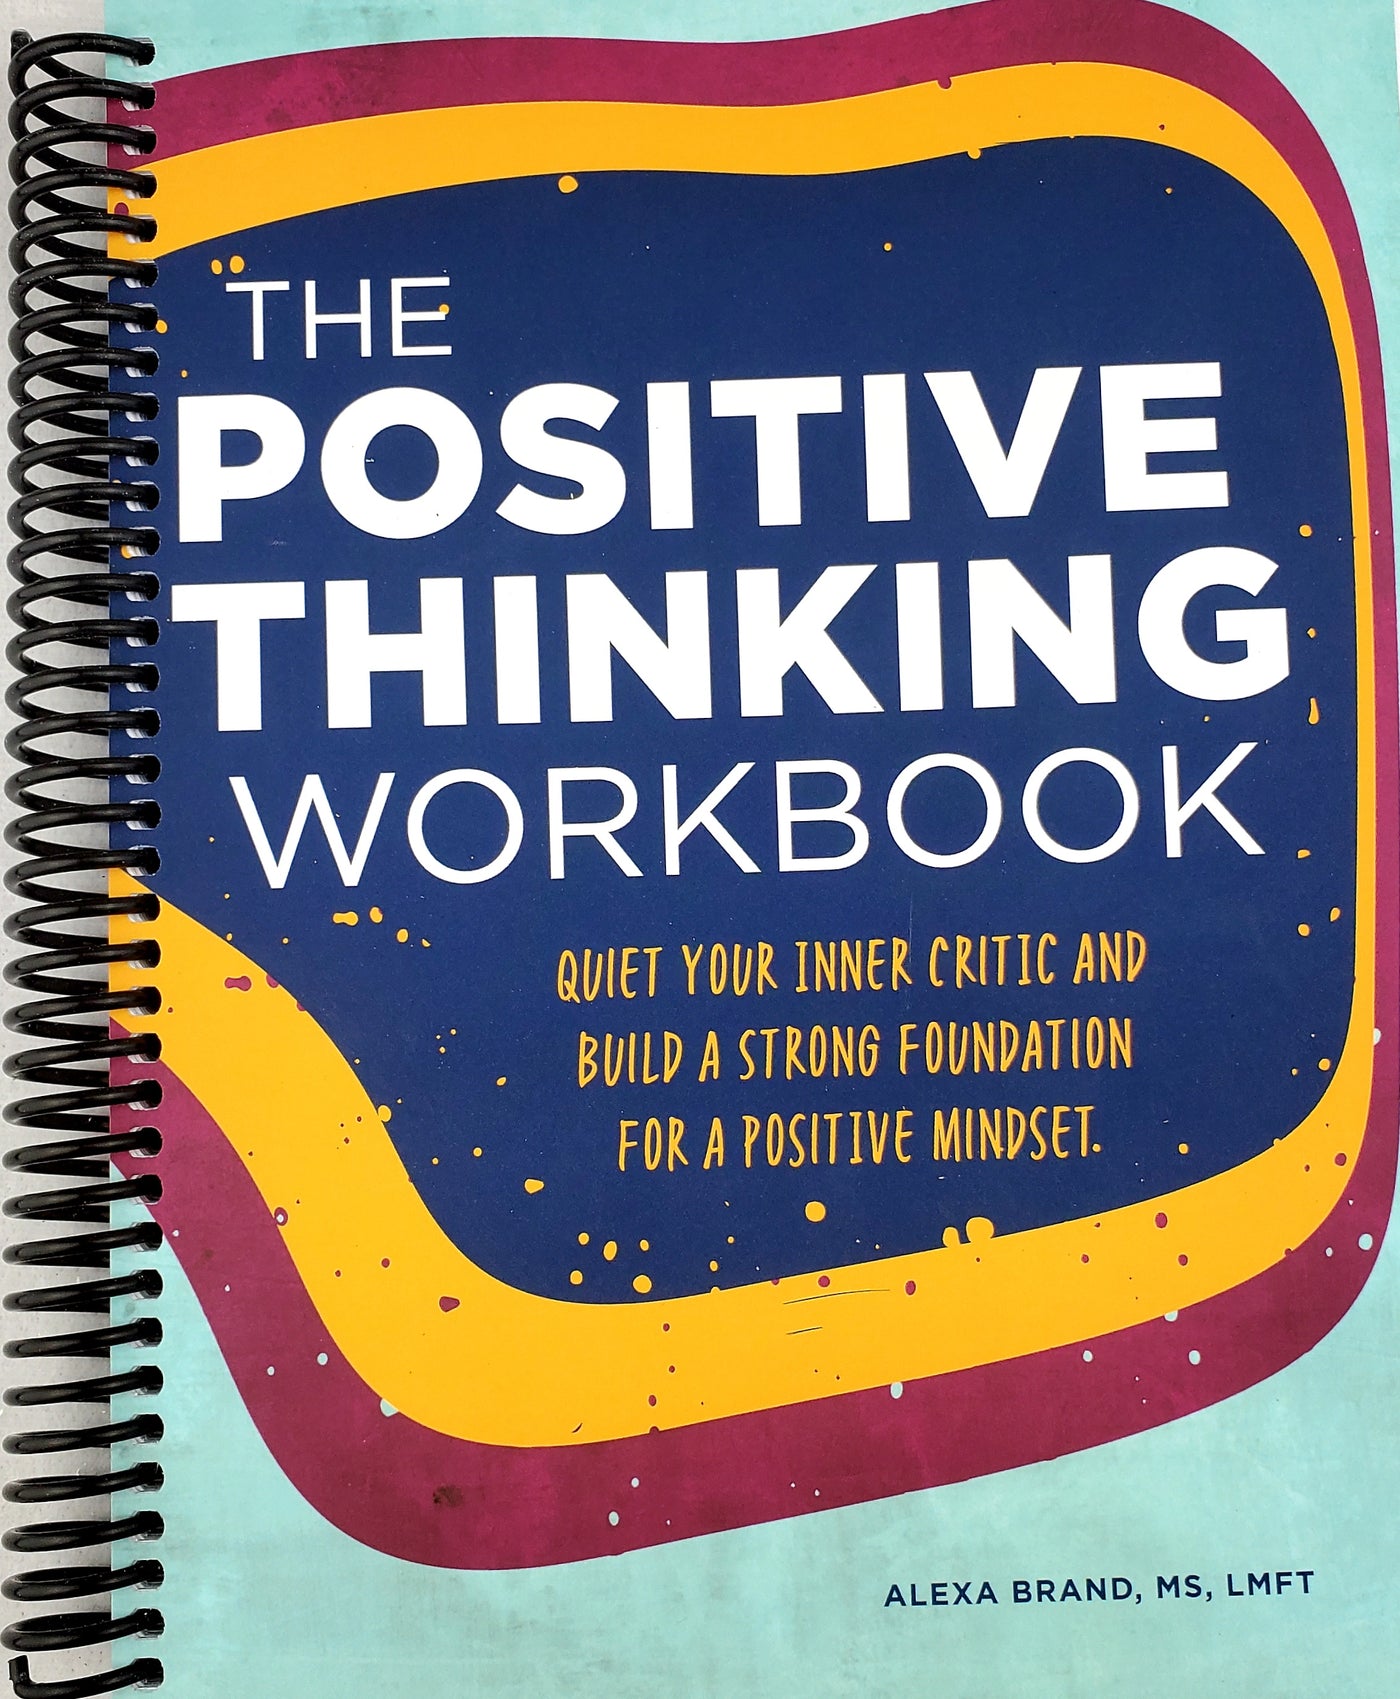 The Positive Thinking Workbook: Quiet Your Inner Critic and Build a Strong Foundation for a Positive Mindset (Spiral Bound)